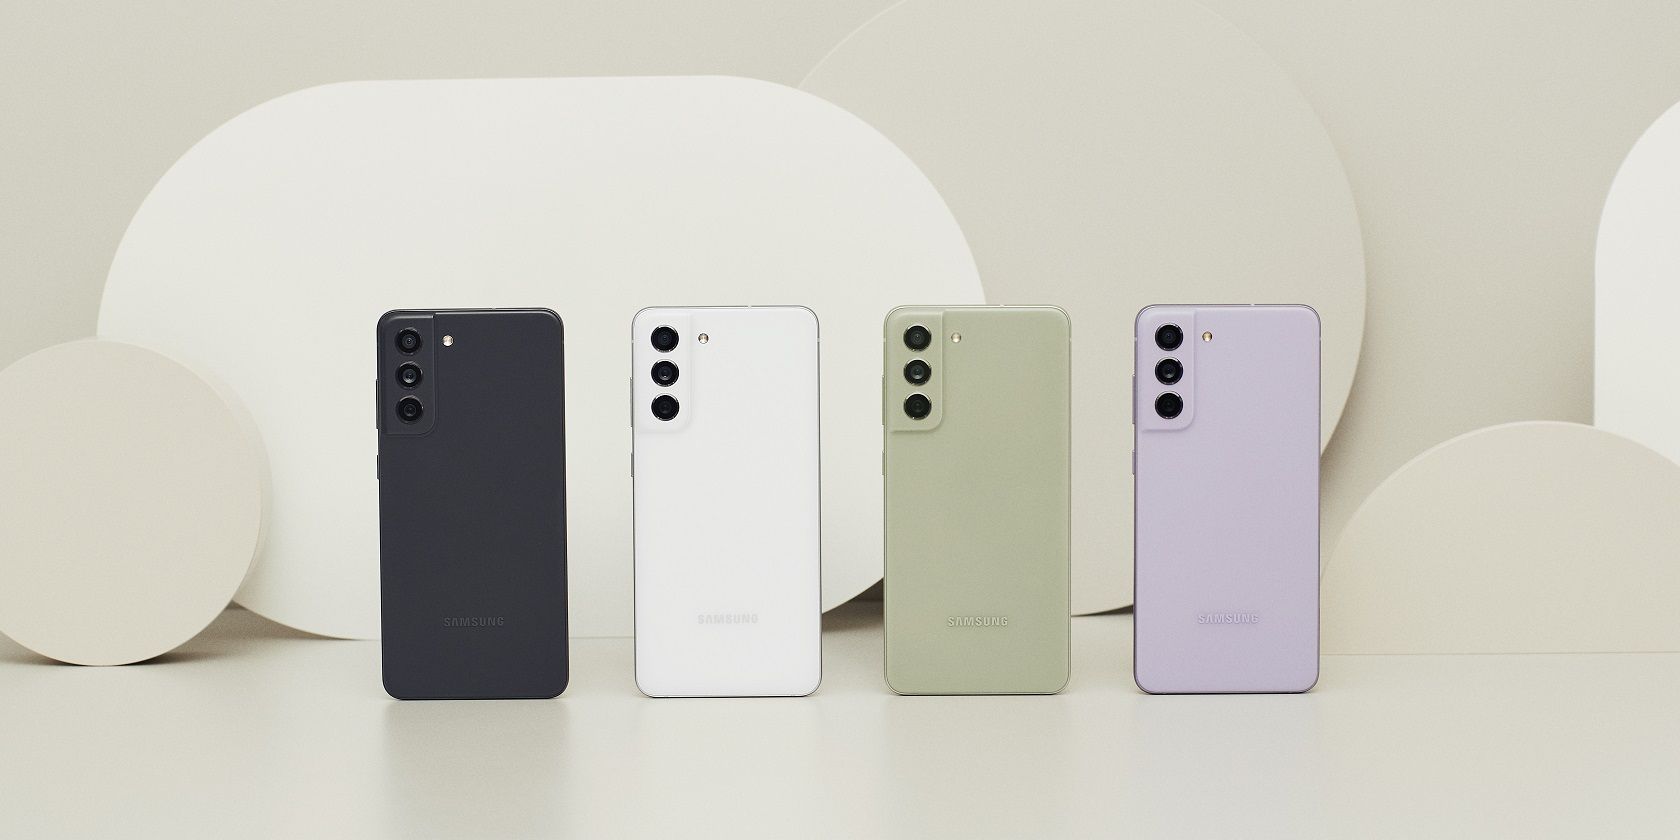 Samsung Galaxy S21 FE in four color variants